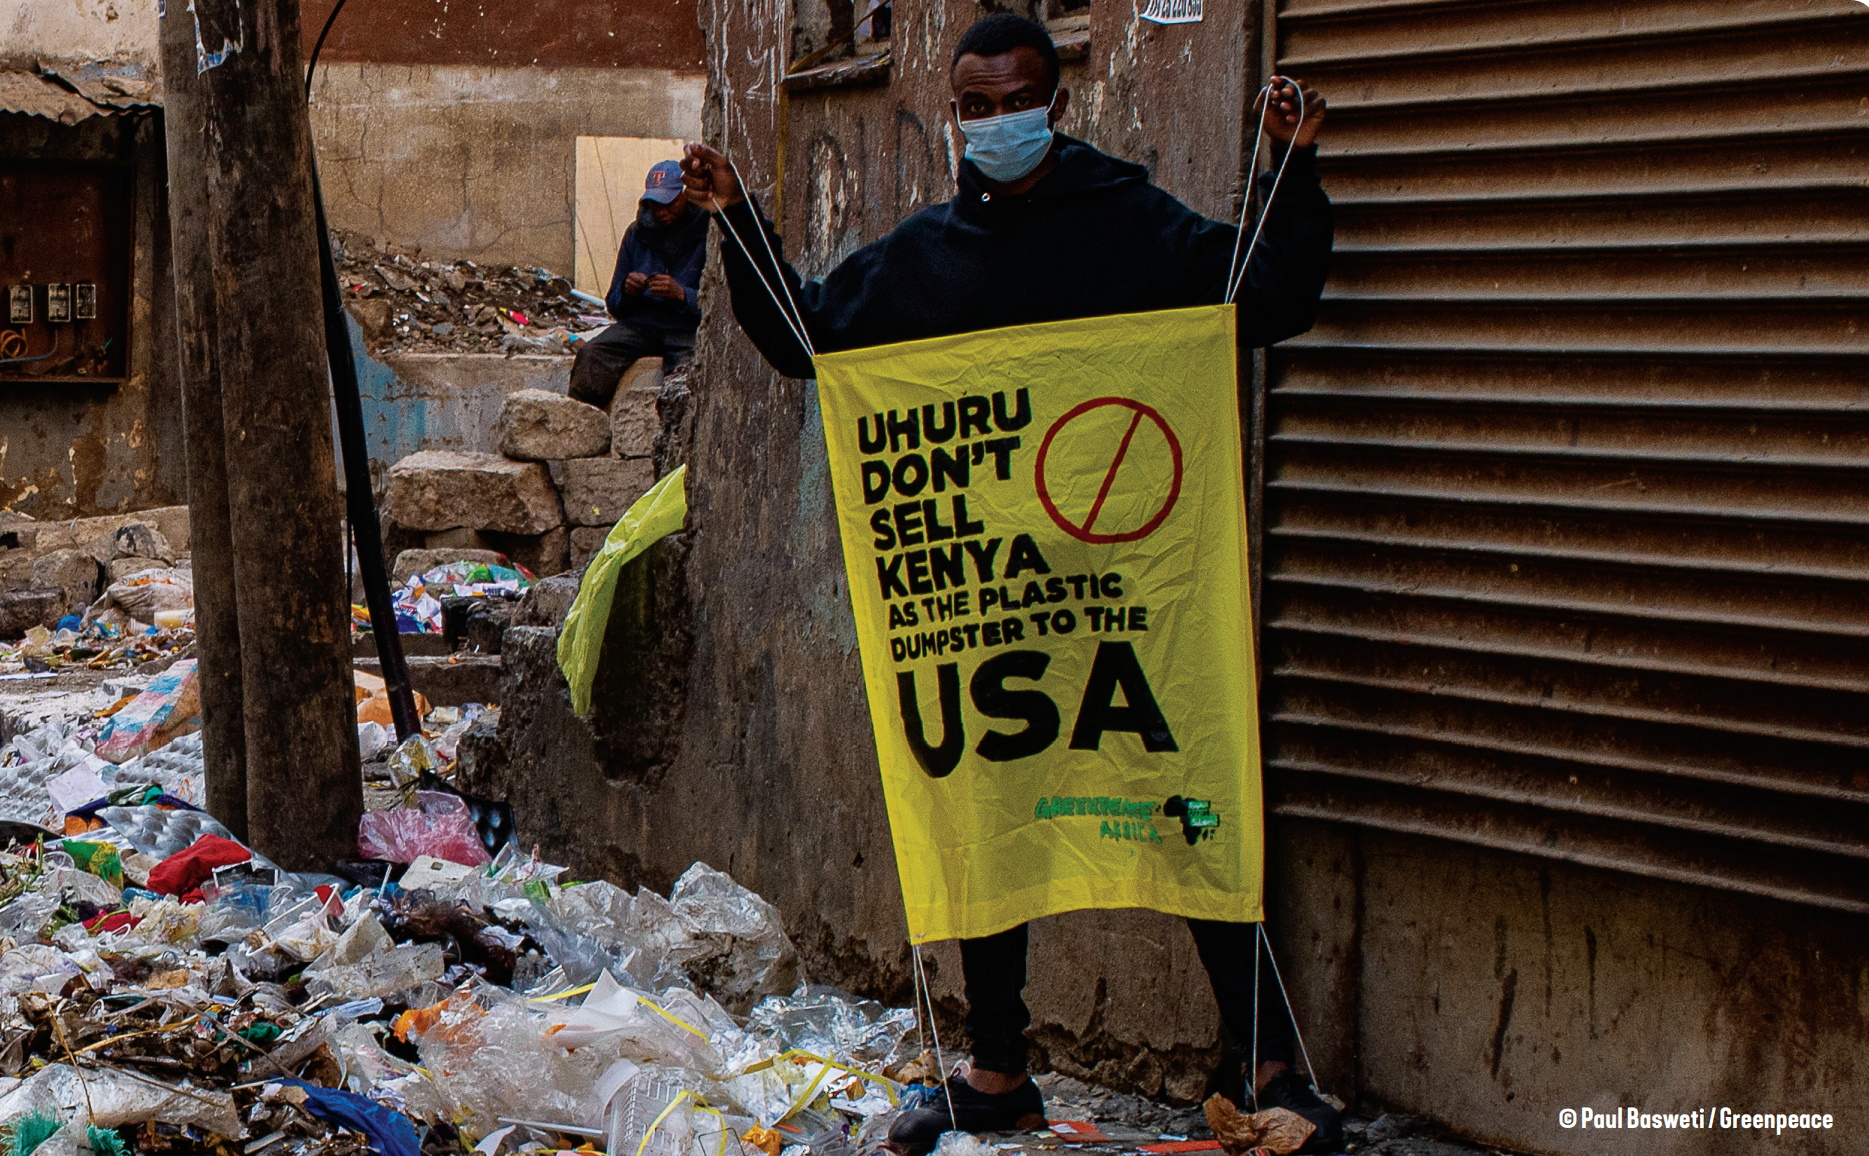 A protester in Kenya holds a sign that reads “Uhuru don’t sell Kenya as the plastic dumpster to the USA”. Photo: Paul Basweti / Greenpeace